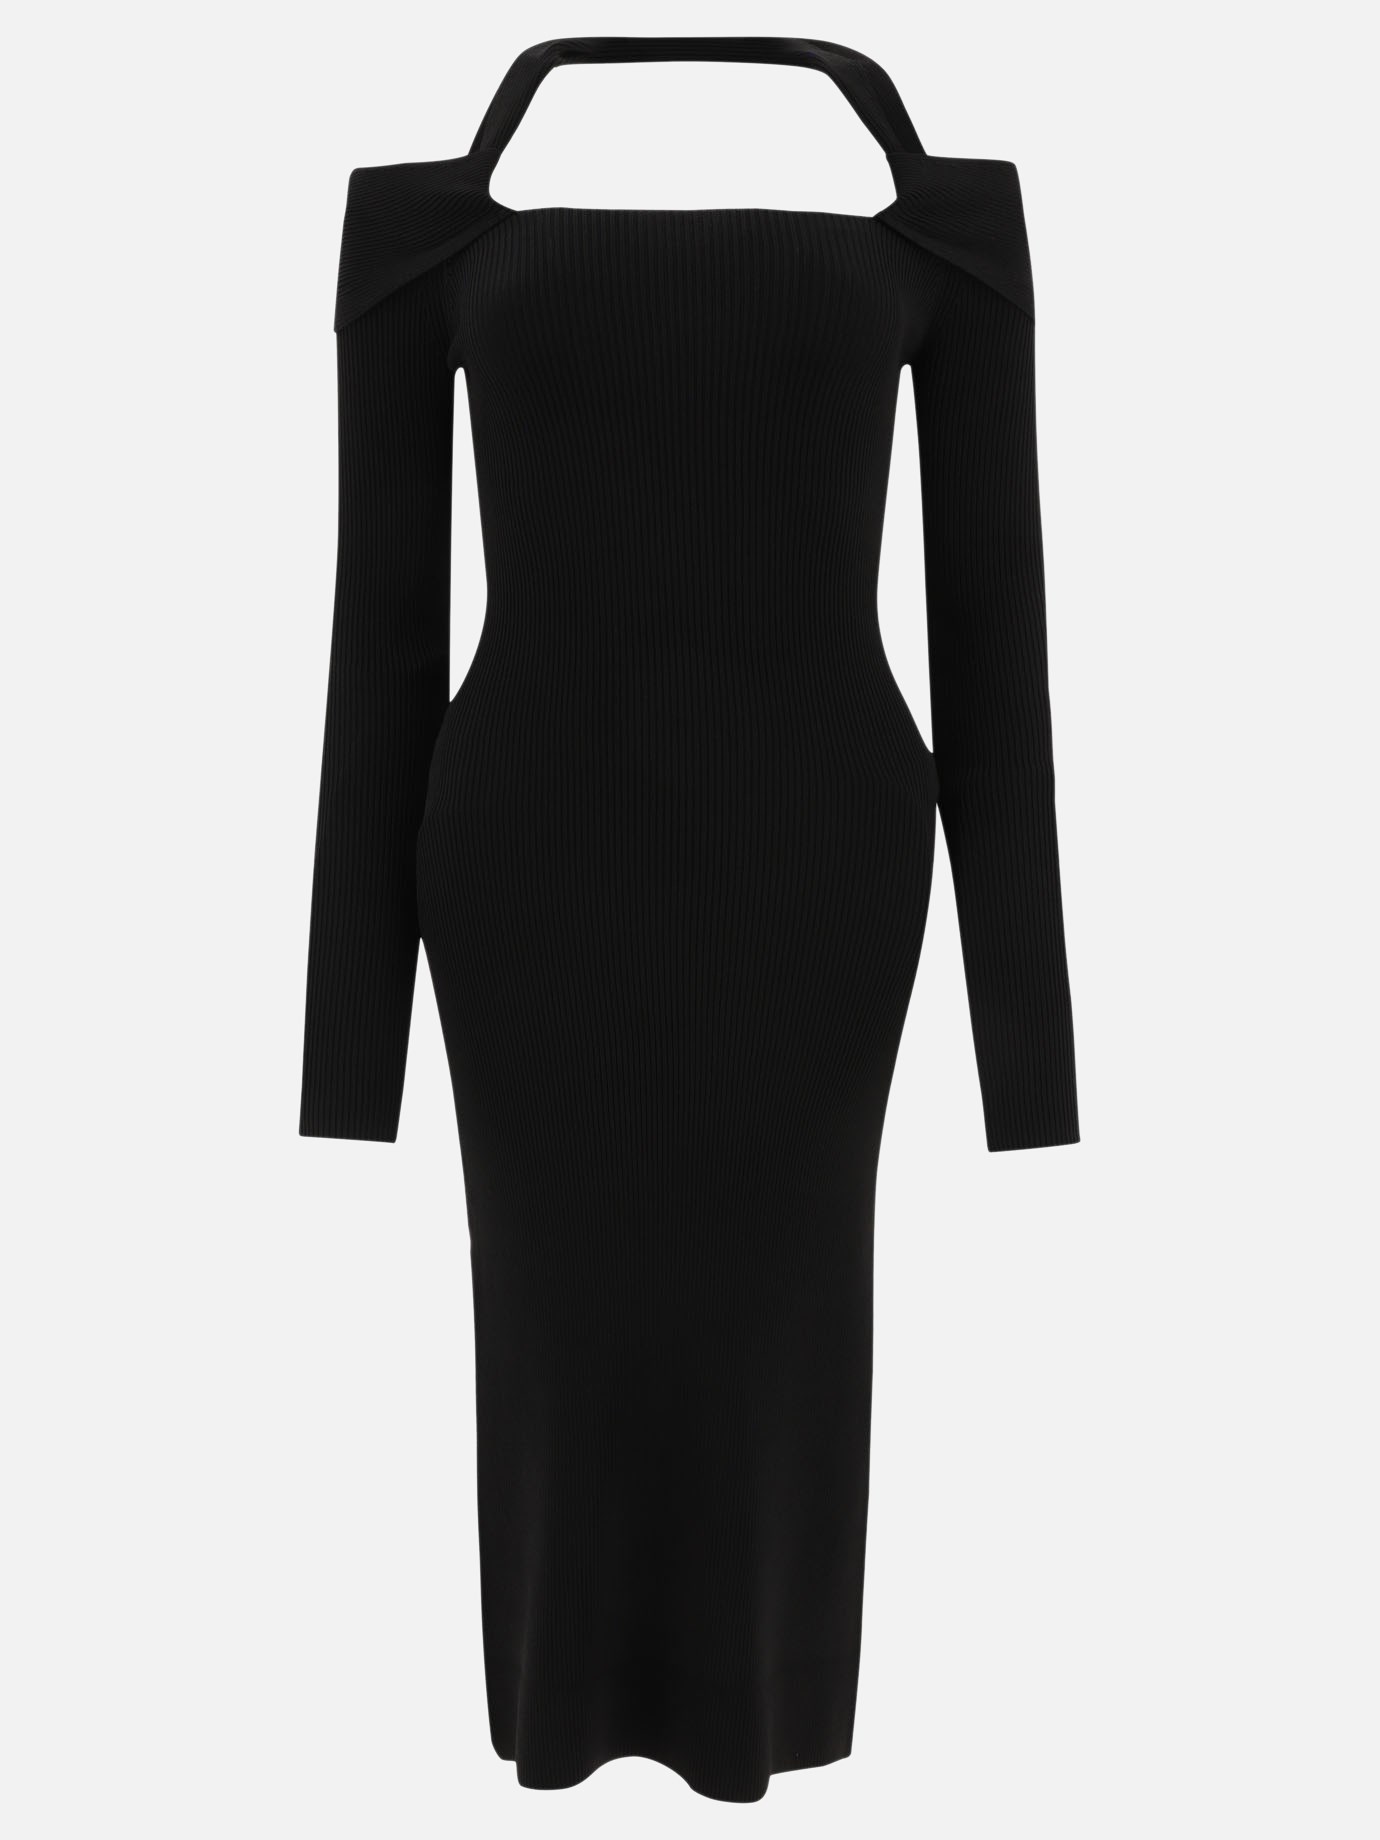 Dress with cut-out by Coperni